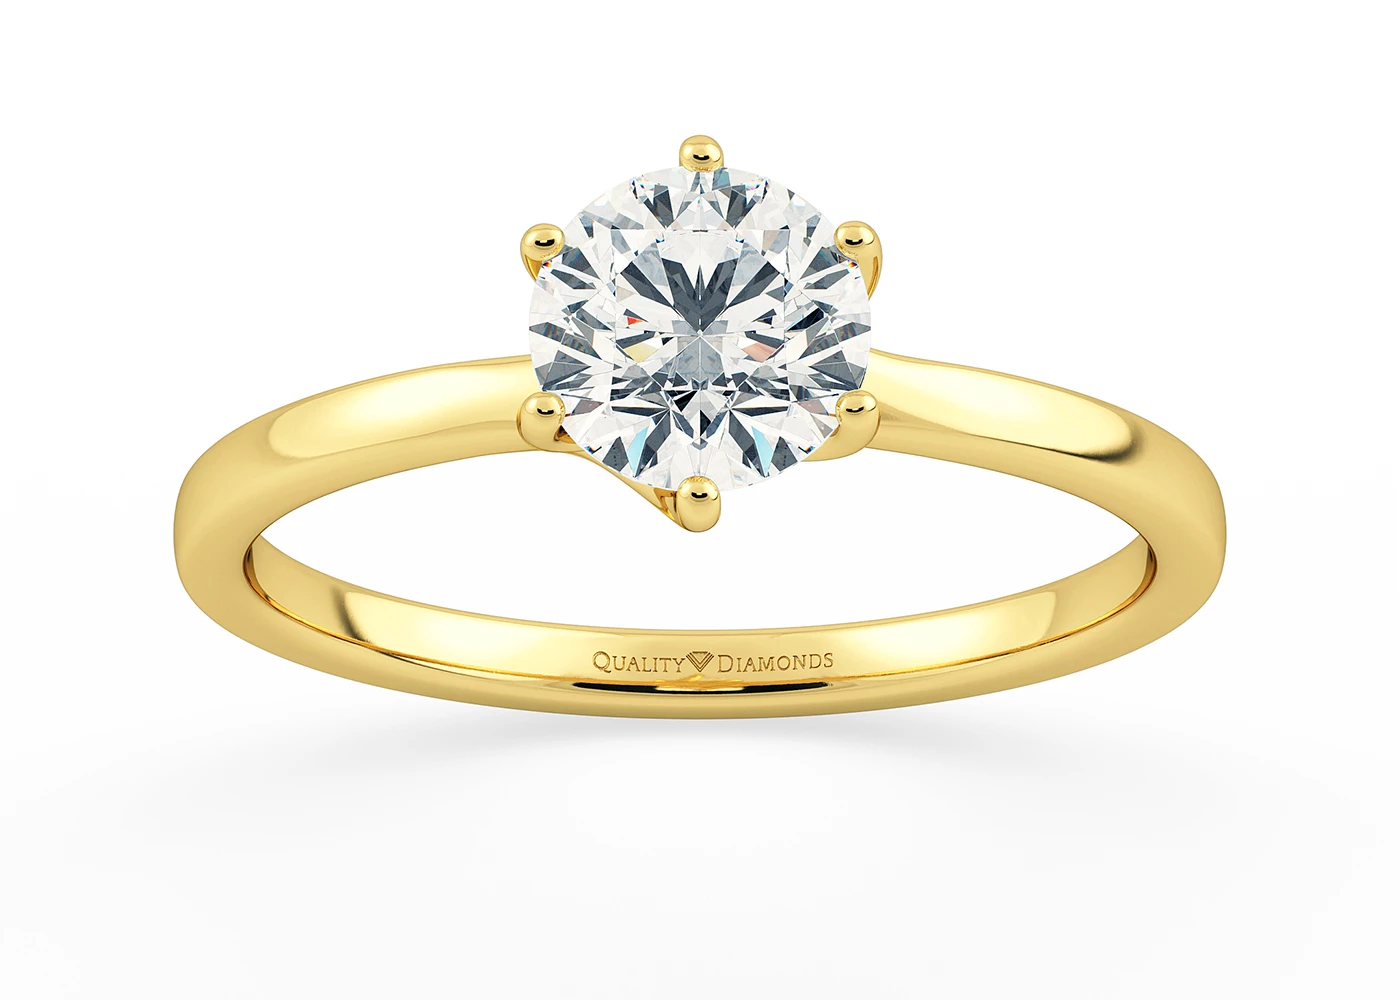 Six Claw Round Brilliant Cura Diamond Ring in 18K Yellow Gold